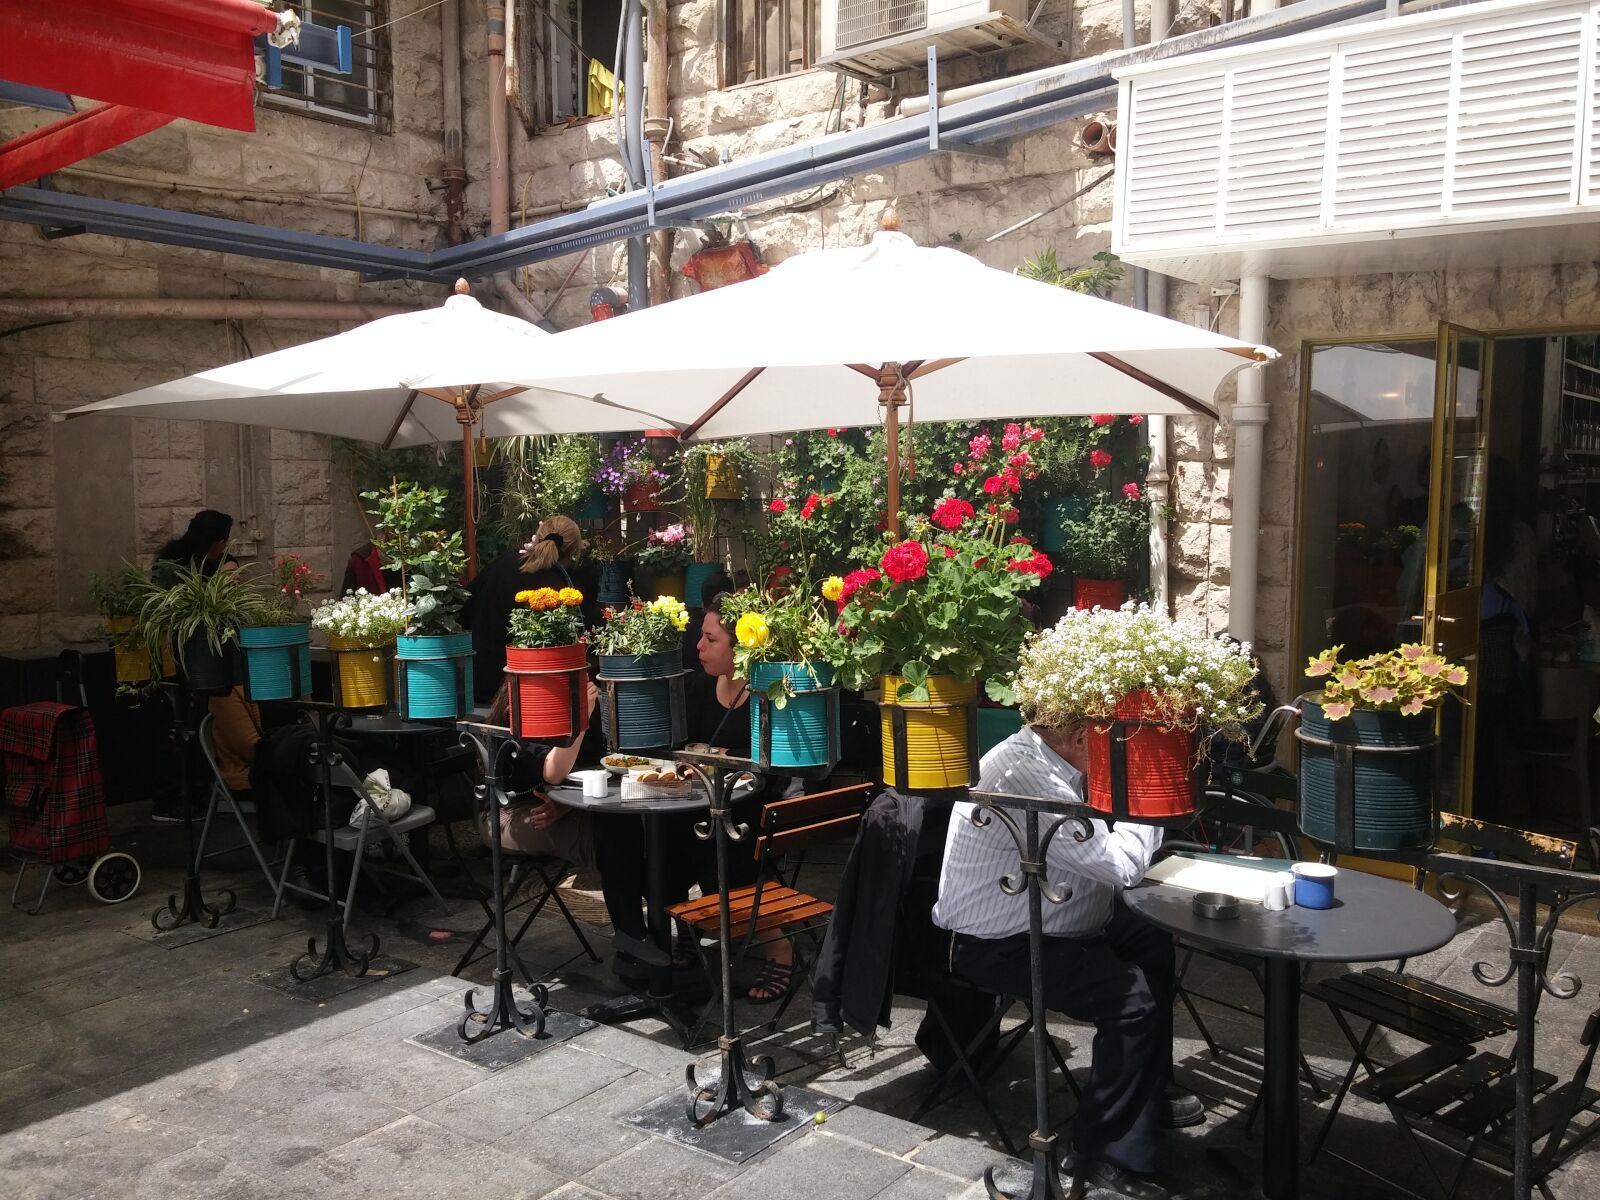 LG D855 sample photo. Market, flowers, colorful photography